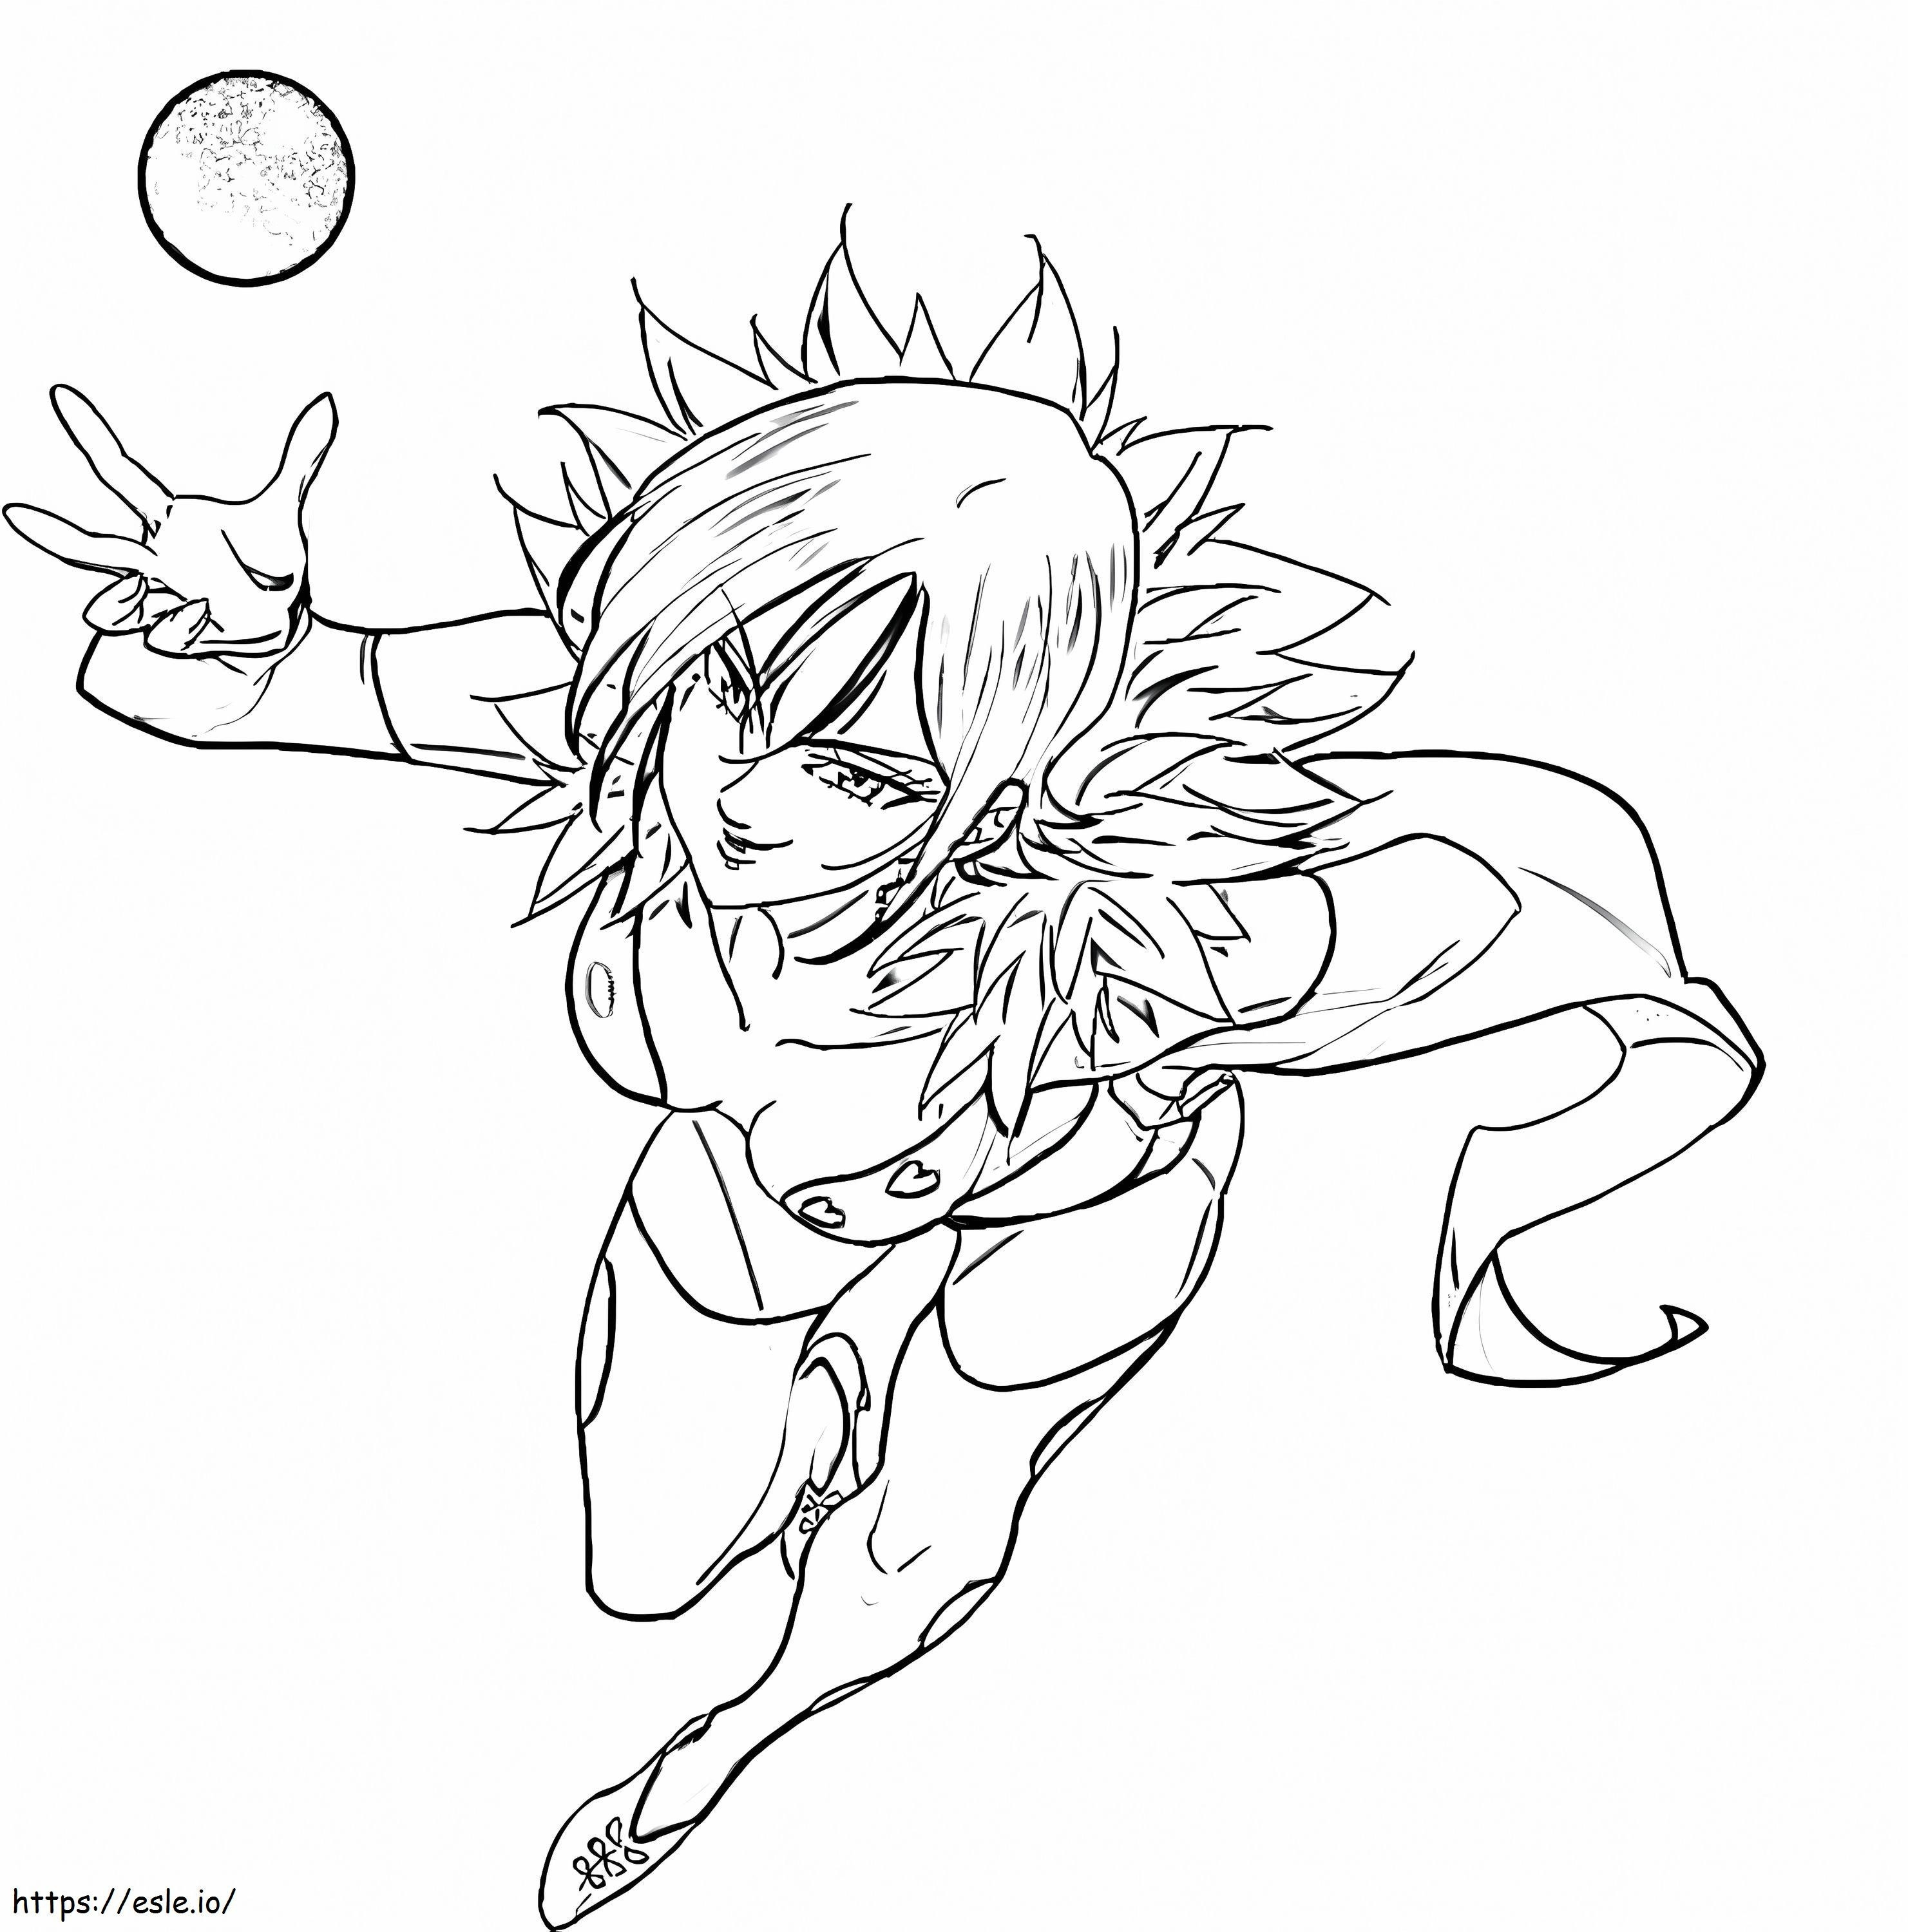 Amazing Merlin coloring page